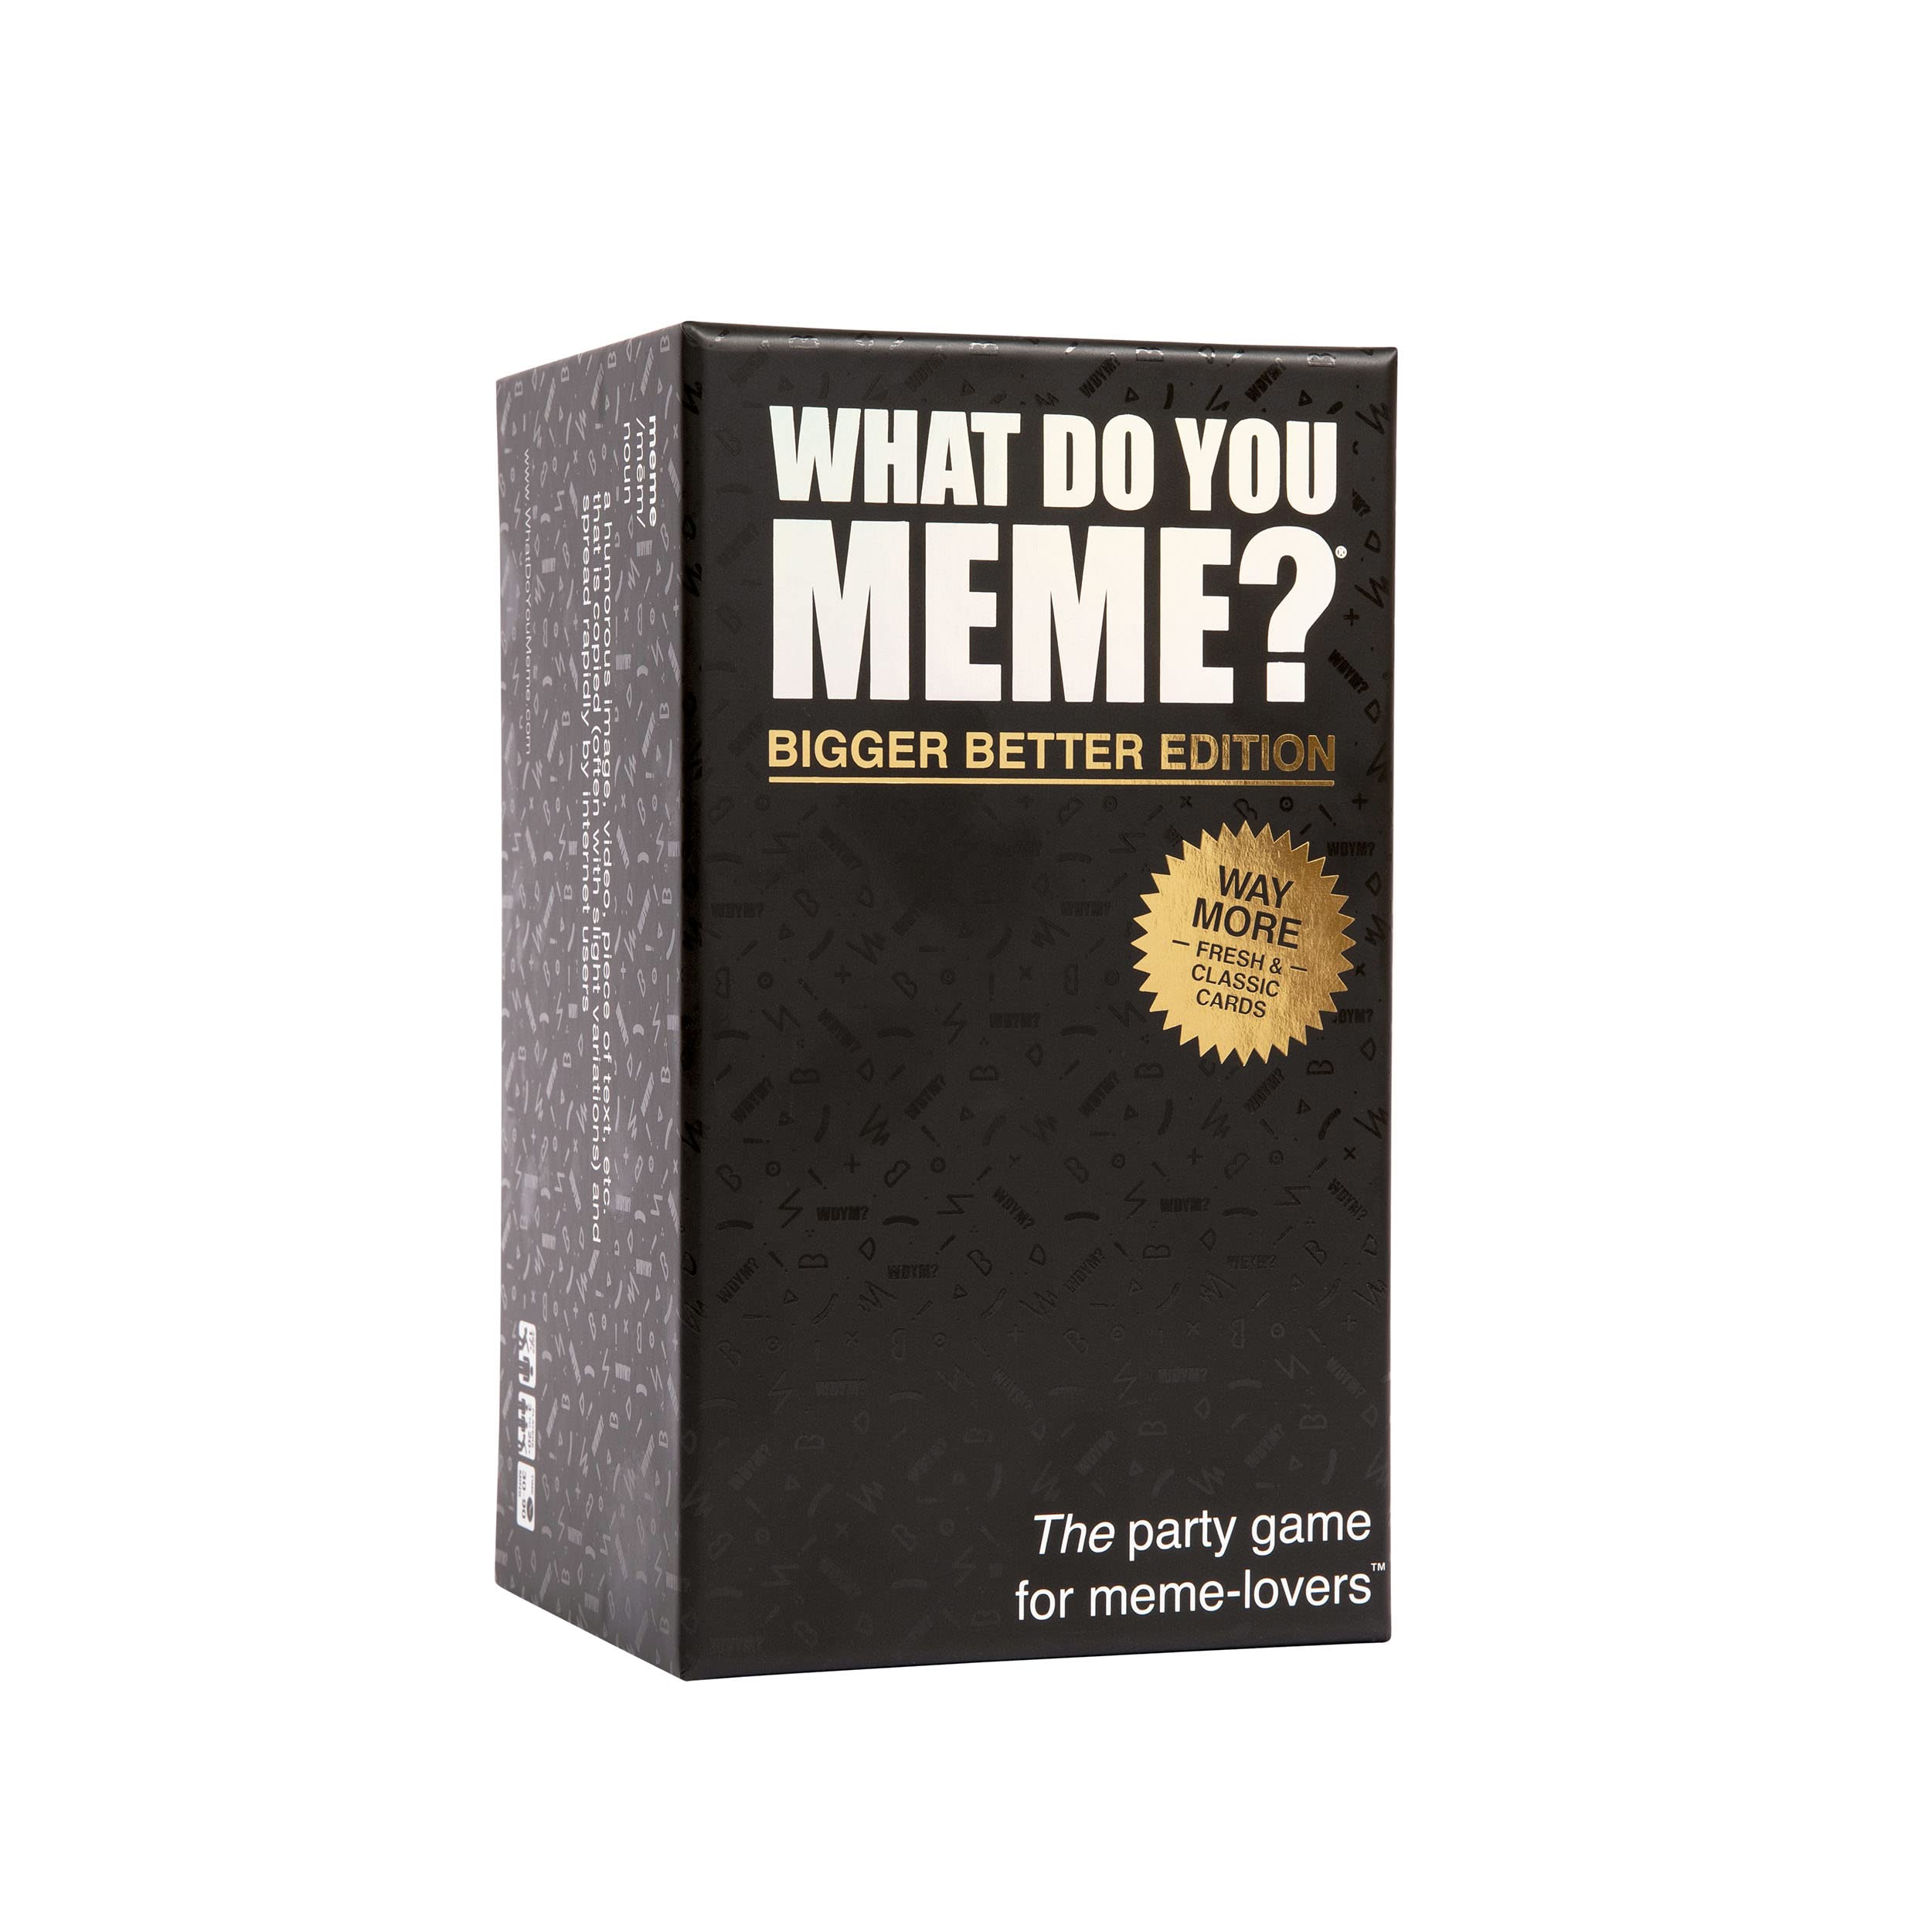 What Do You Meme core game - The Hilarious Adult Party game for Meme Lovers (Bigger Better Edition)